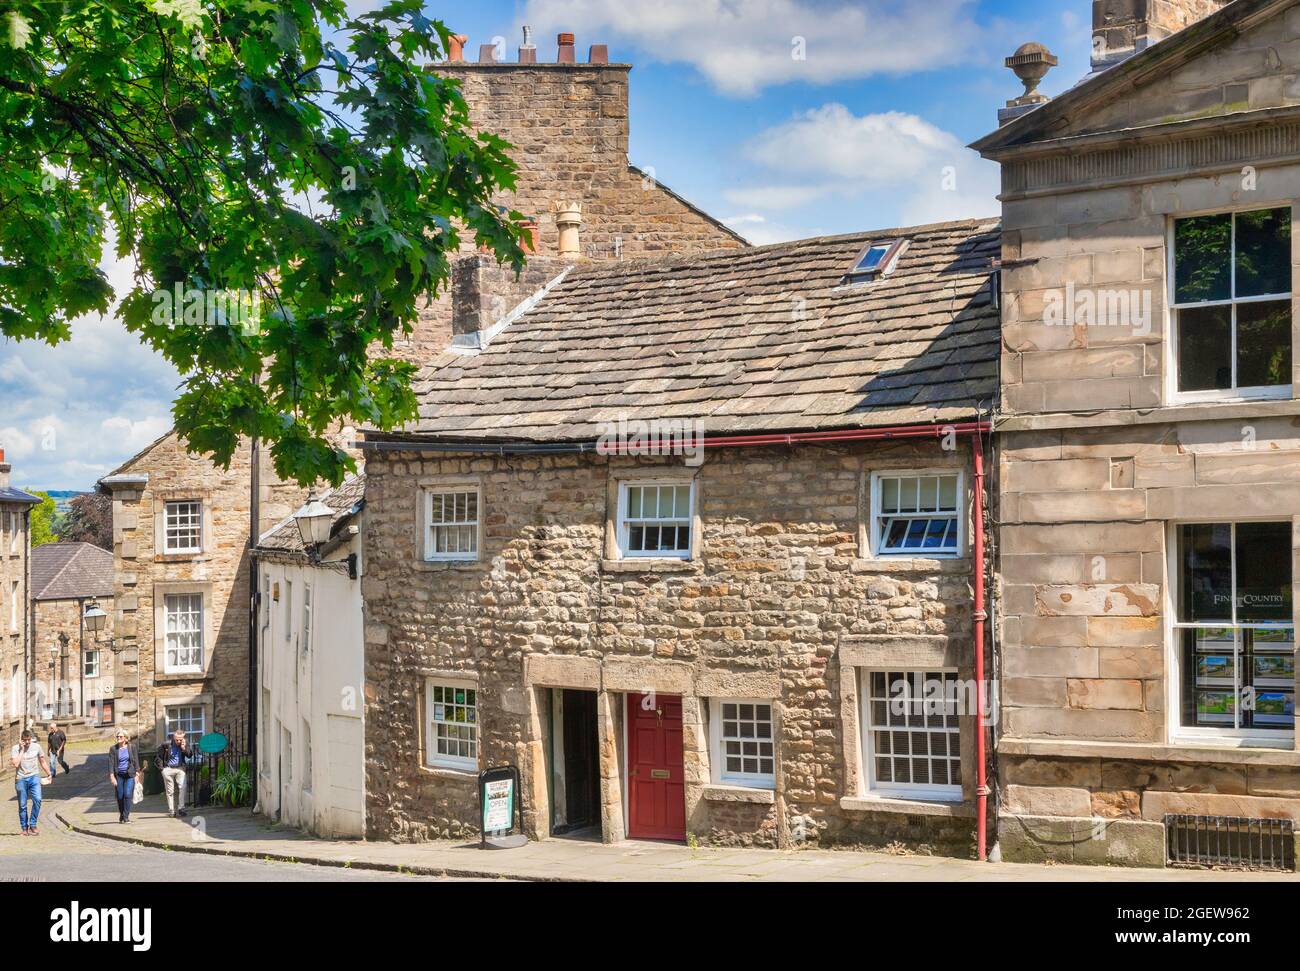 12 July 2019: Lancaster, UK - The Cottage Museum, which gives a glimpse of early Victorian life, a group of people walking up hill towards it. Stock Photo